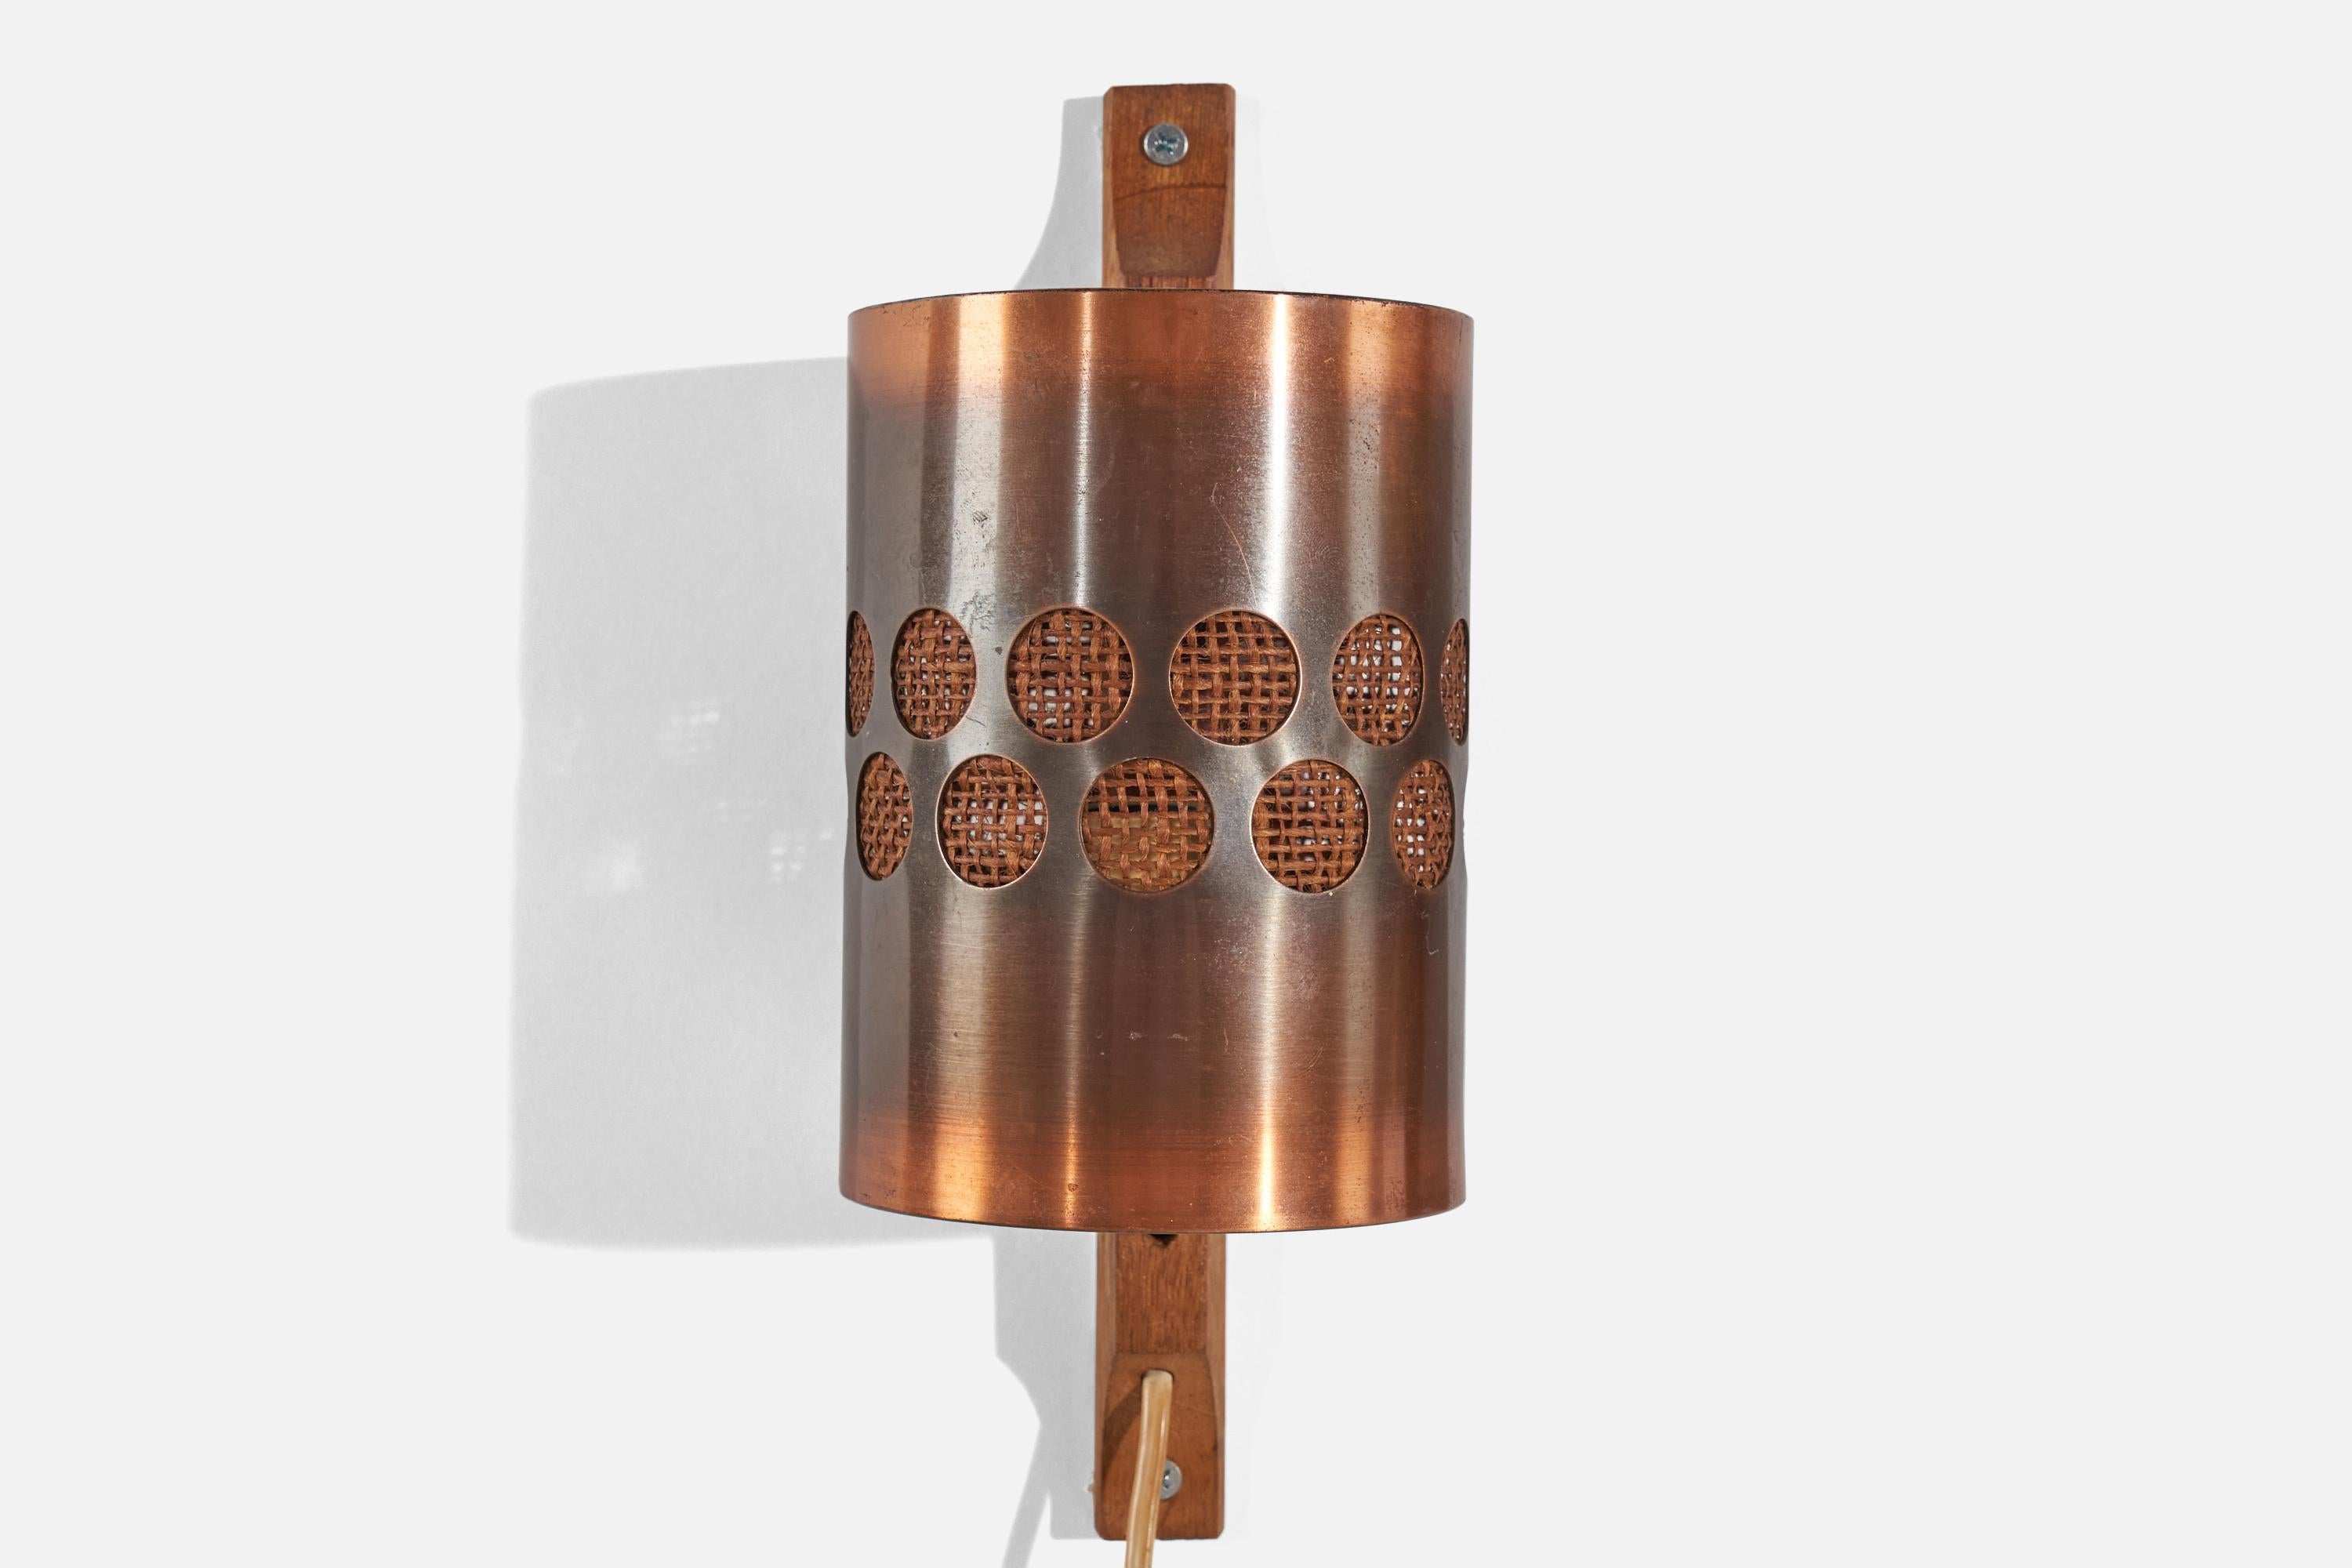 Nils H. Ledung, Wall Lights, Oak, Copper, Burlap, Sweden, 1960s In Good Condition For Sale In High Point, NC